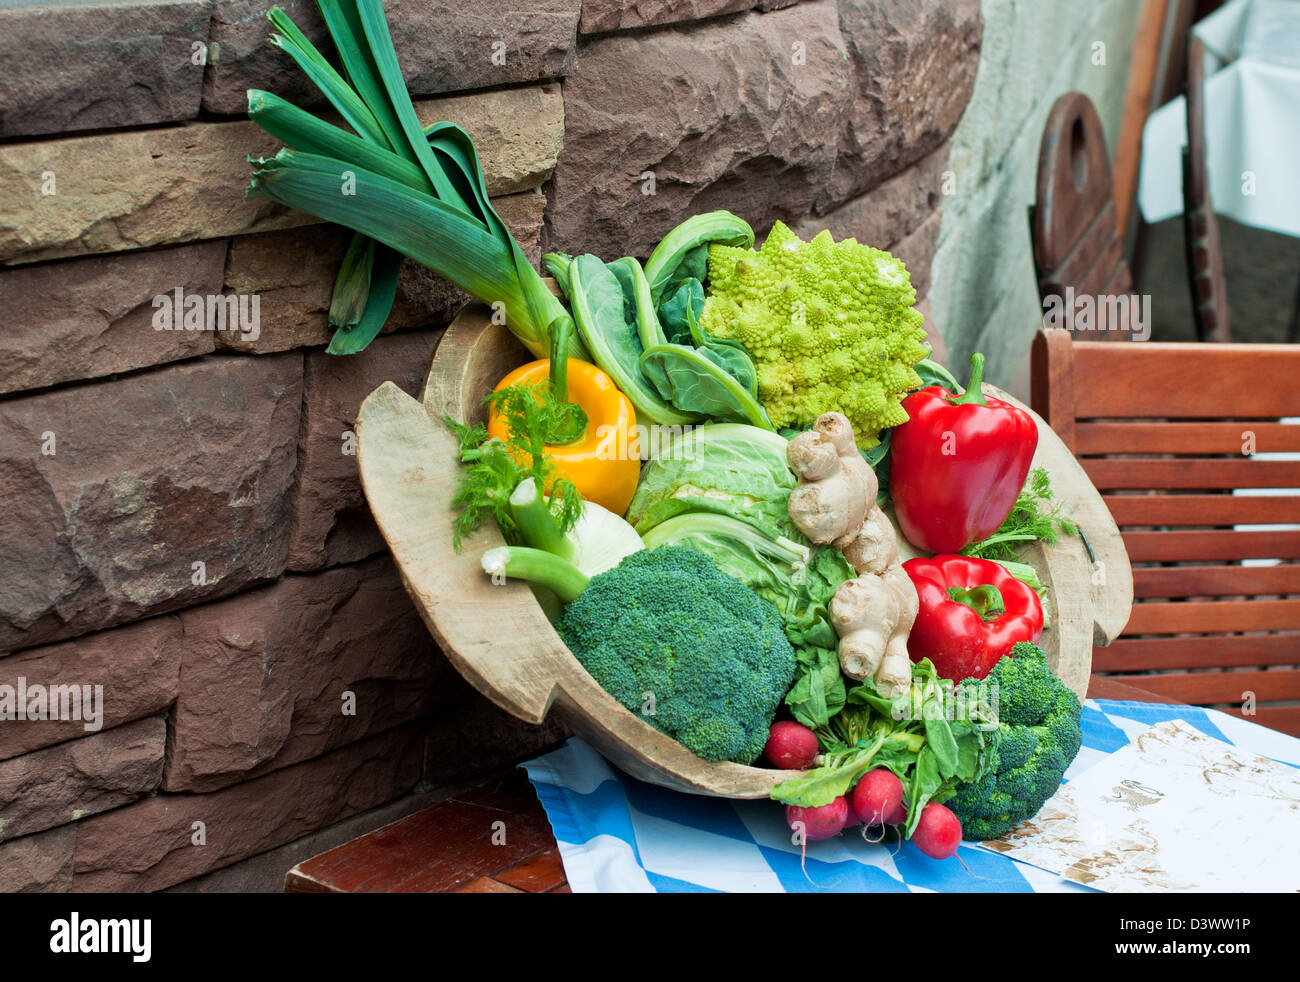 abundance, autumn, background, basket, brown, cafe, carrot, cauliflower, color, colorful, cucumbers, diet, food, fresh, Stock Photo